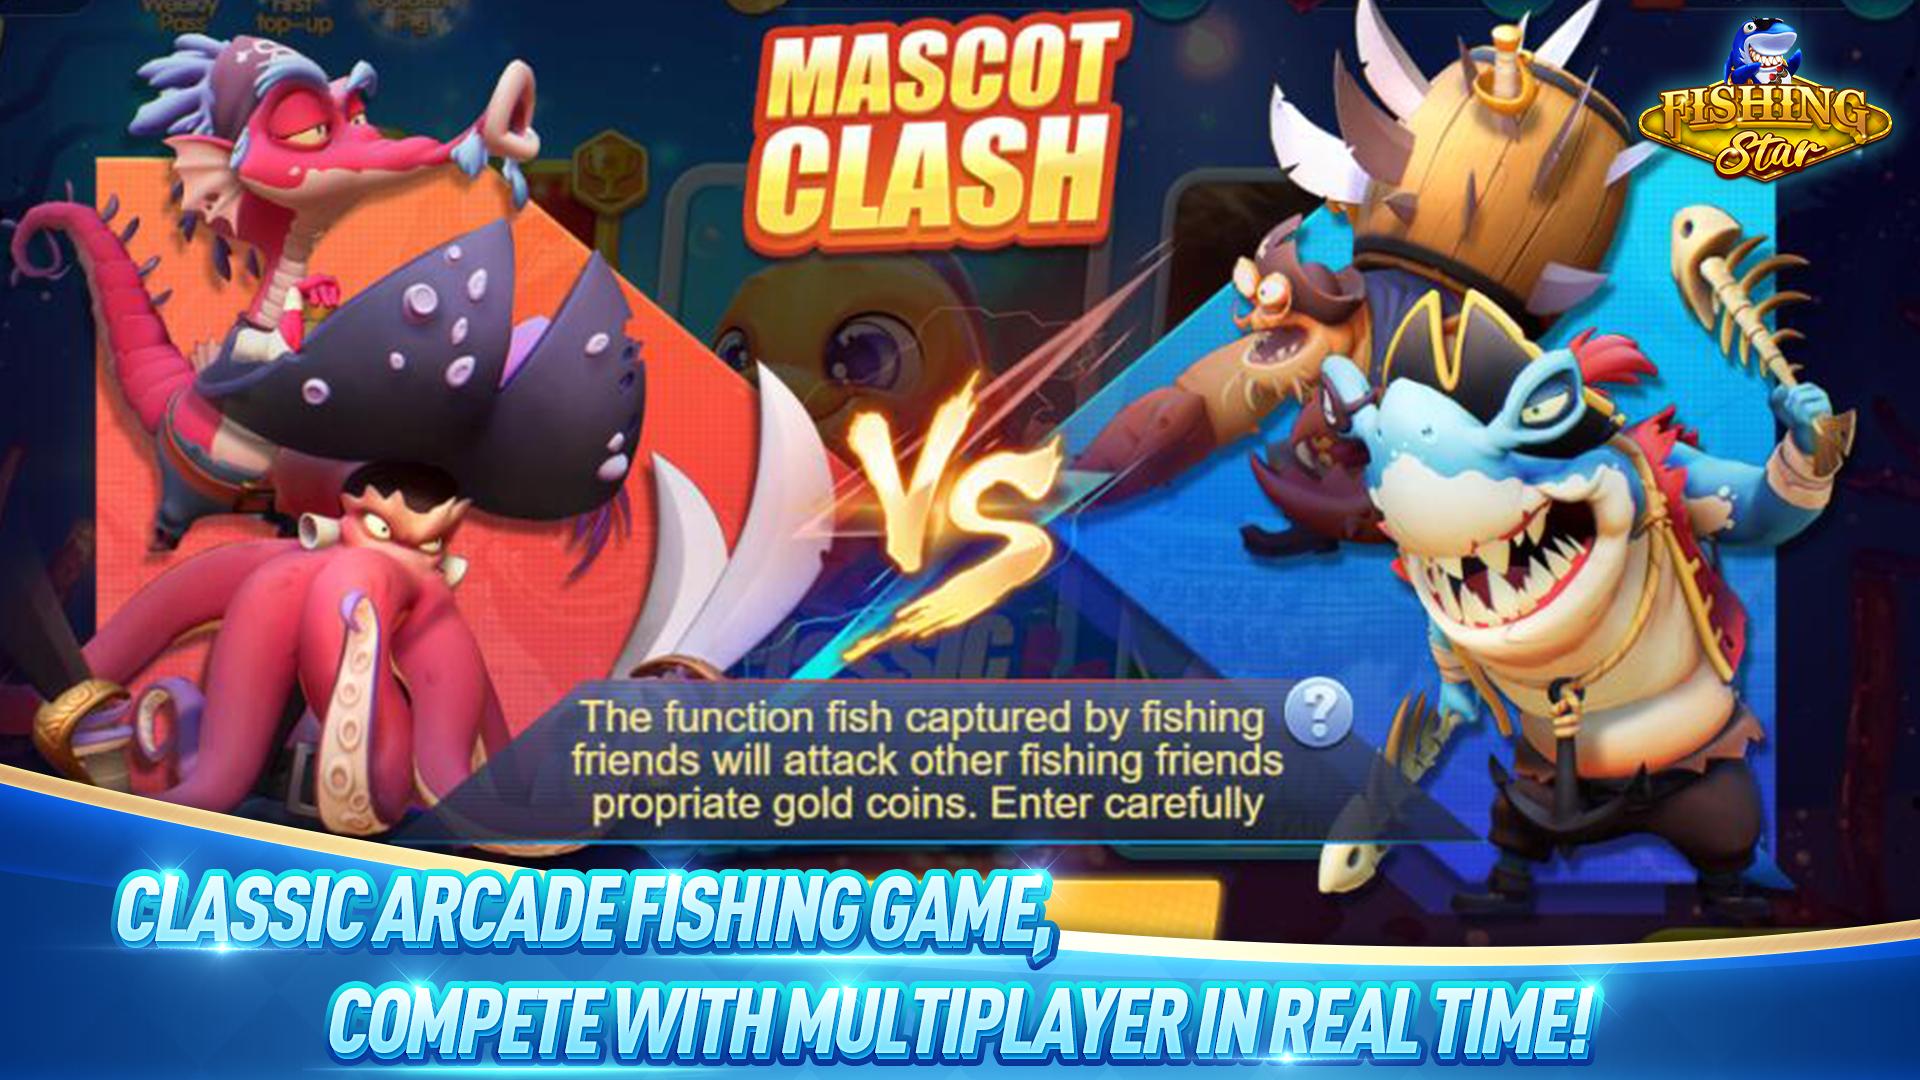 Download Fishing star android on PC